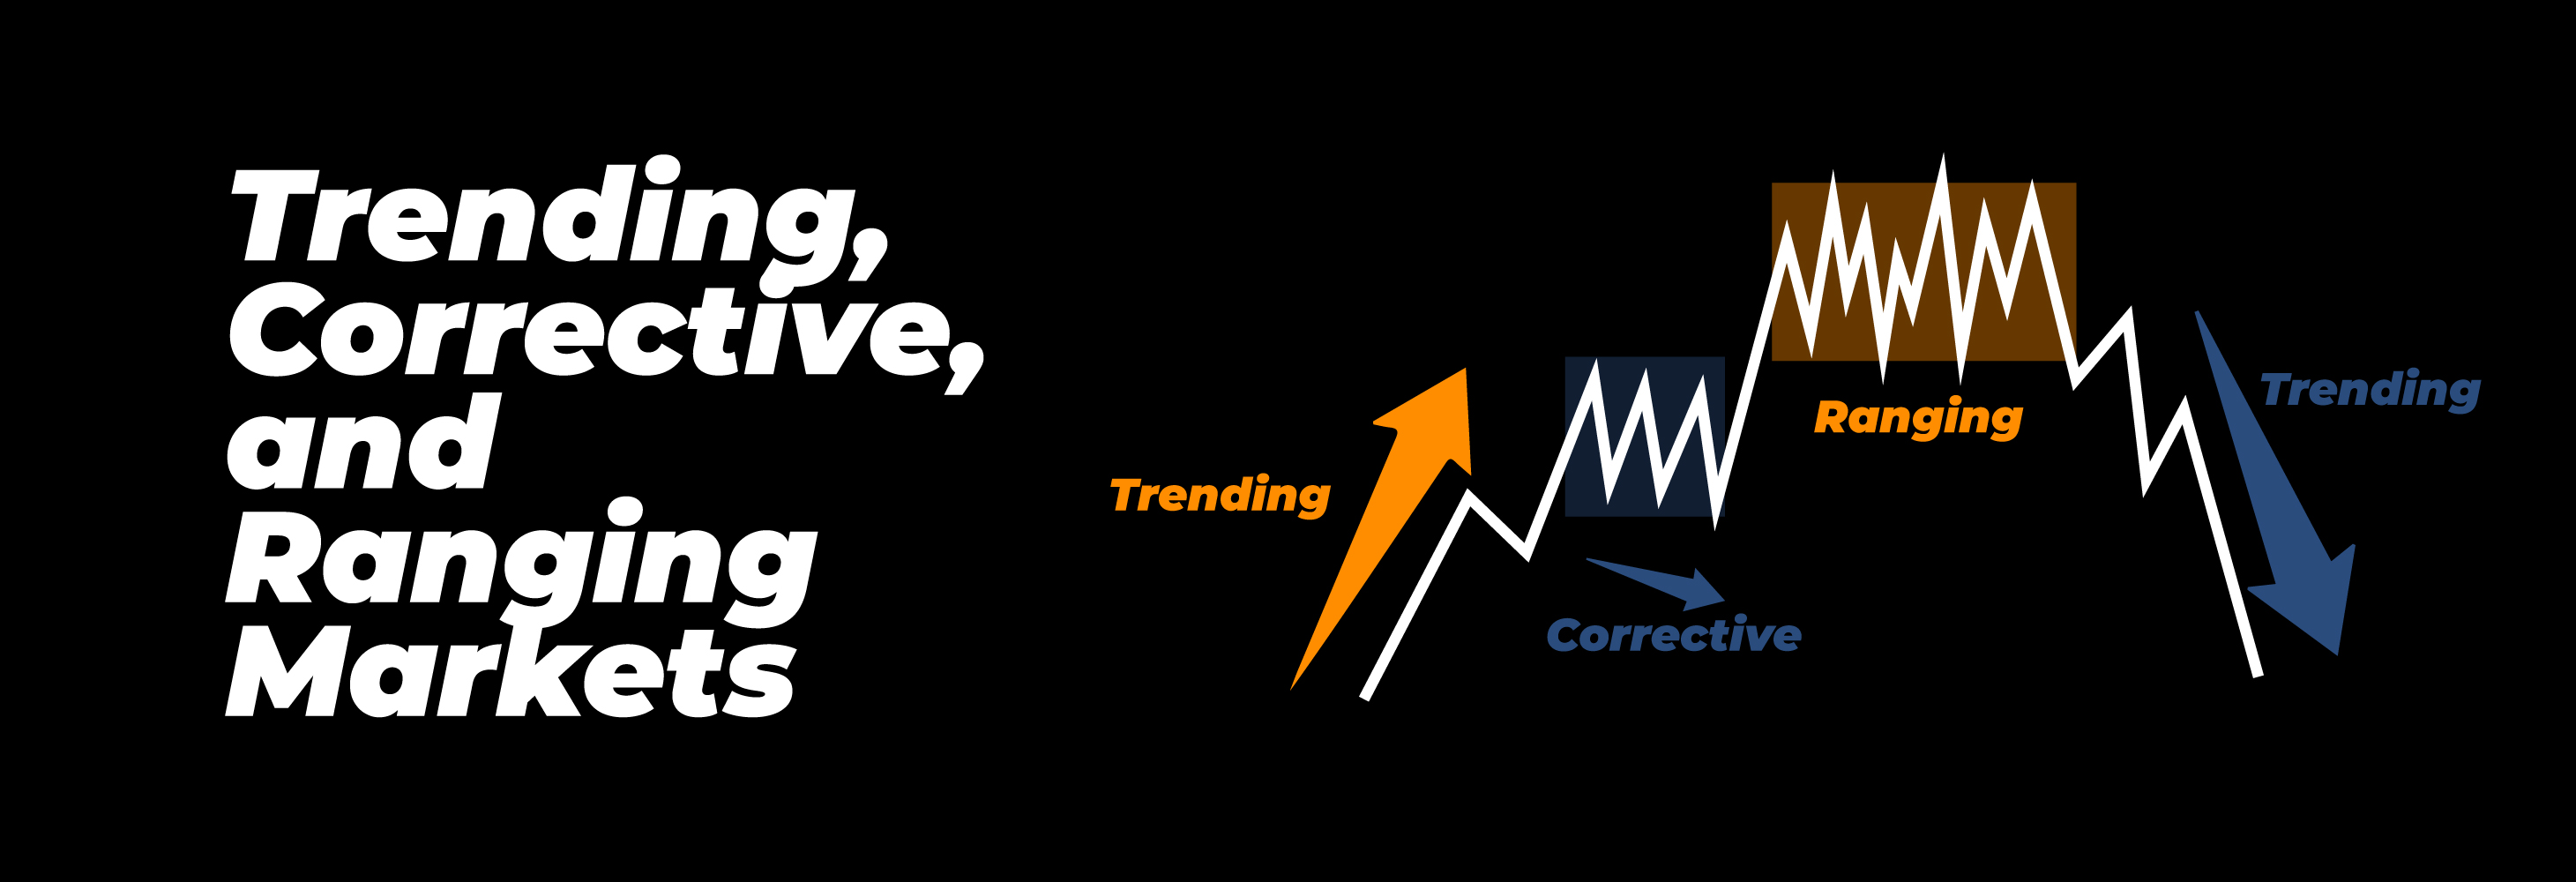 Trending, Corrective, and Ranging Markets